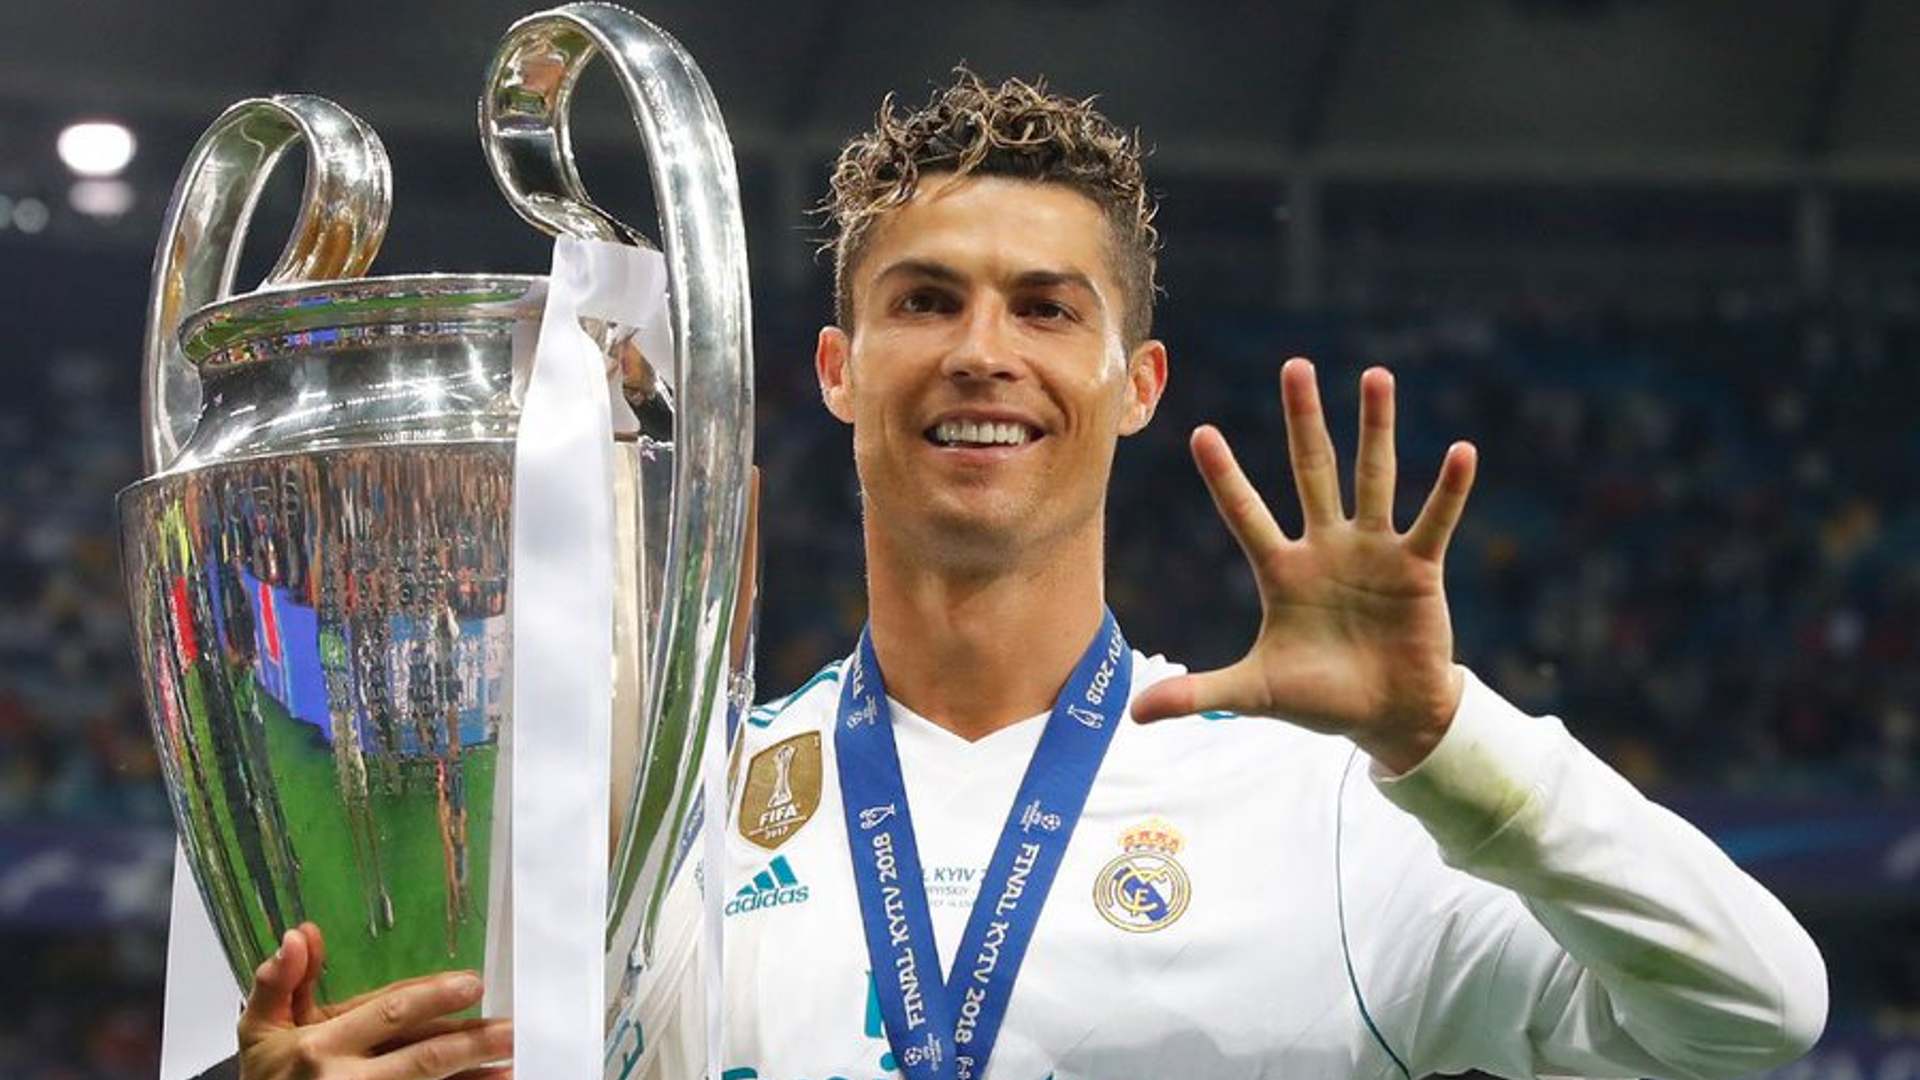 Top Champions League Goalscorer of all time, Cristiano Ronaldo, Credit: Twitter/@realmadrid